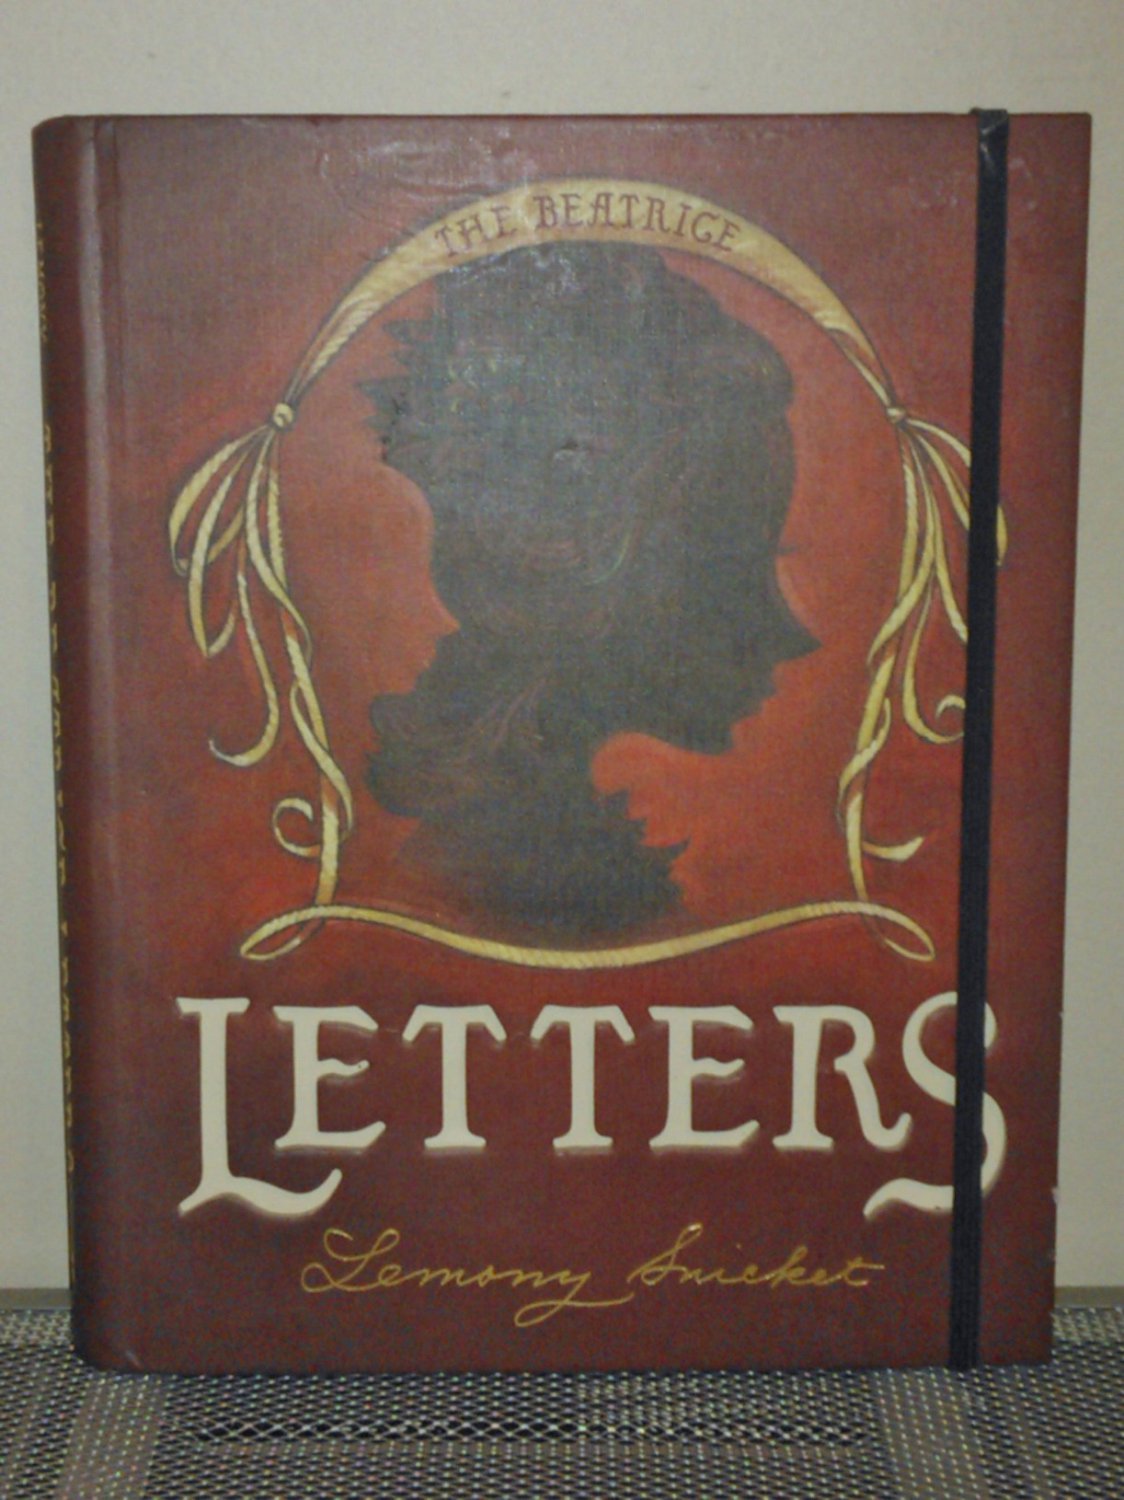 the beatrice letters by lemony snicket